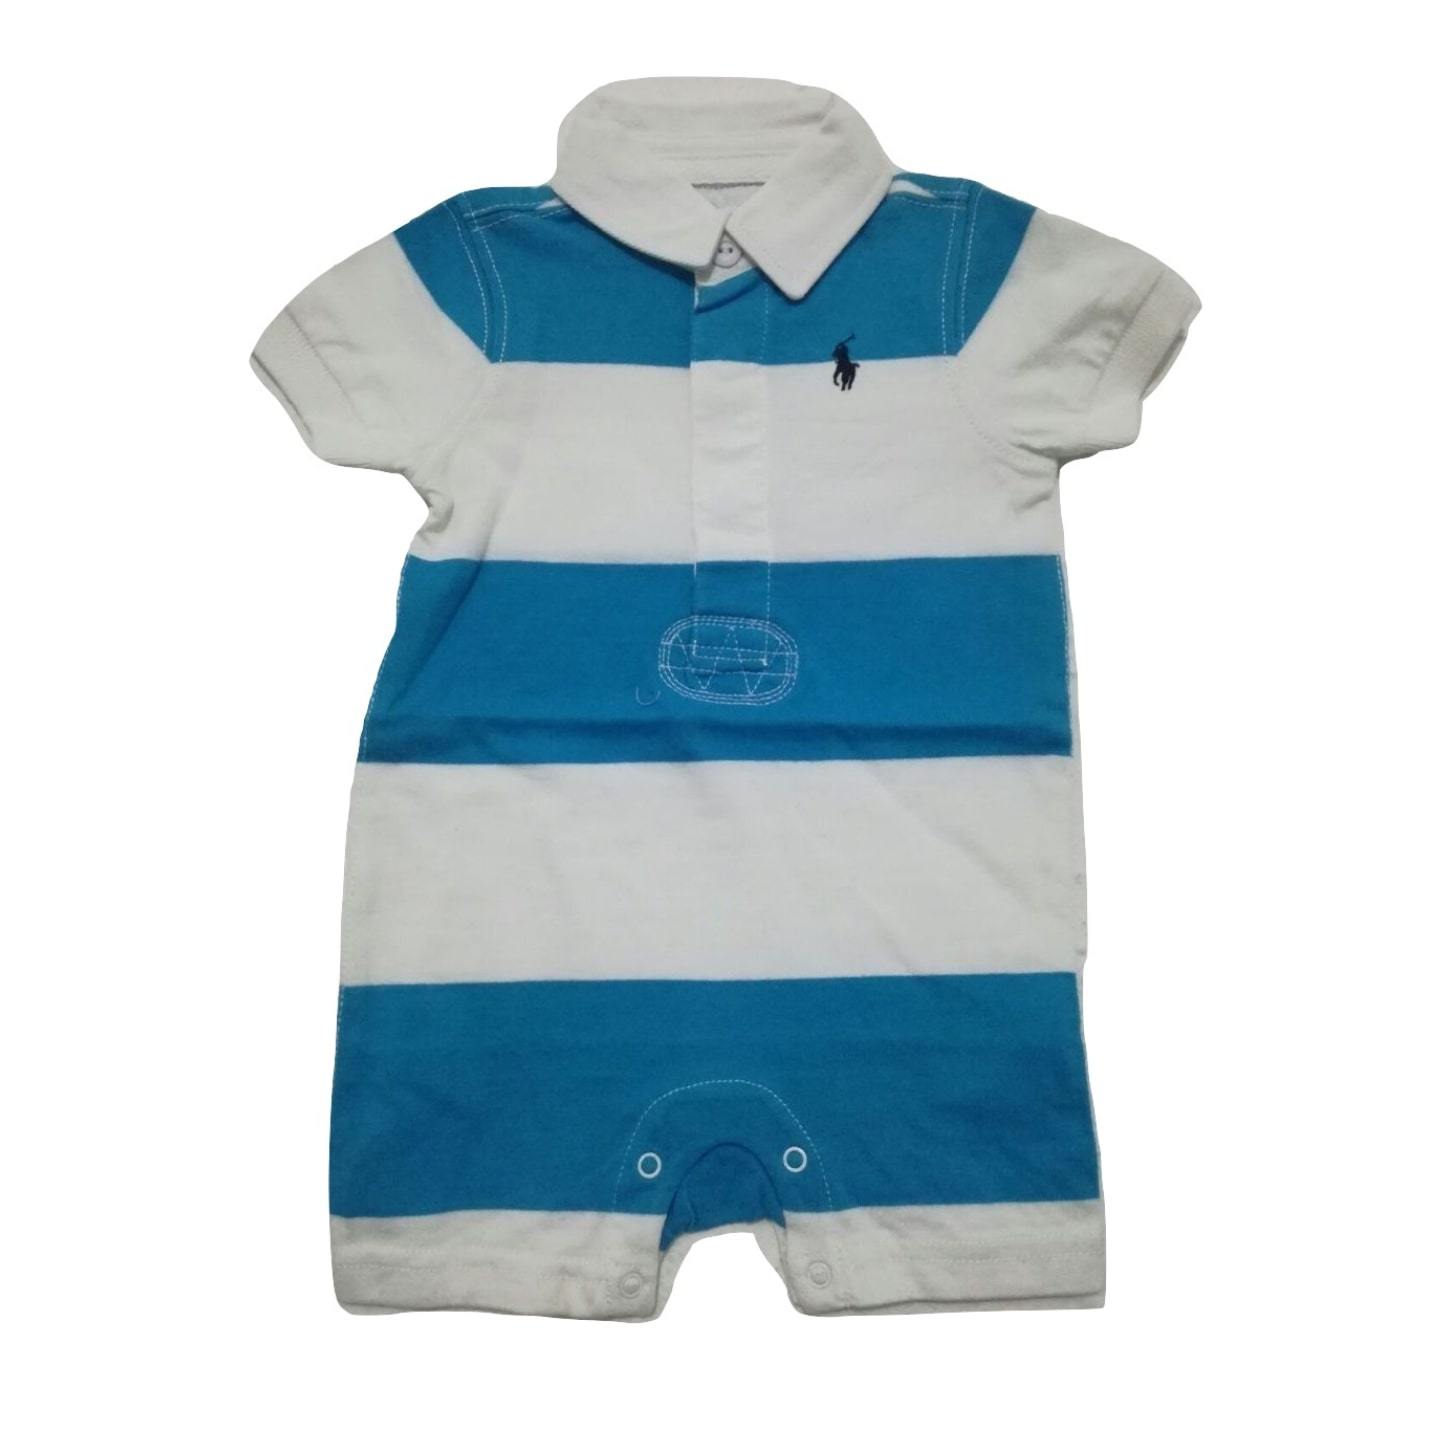 Polo by  Ralph Lauren White collar with Blue and white  Stripe Romper - Stockpoint Apparel Outlet